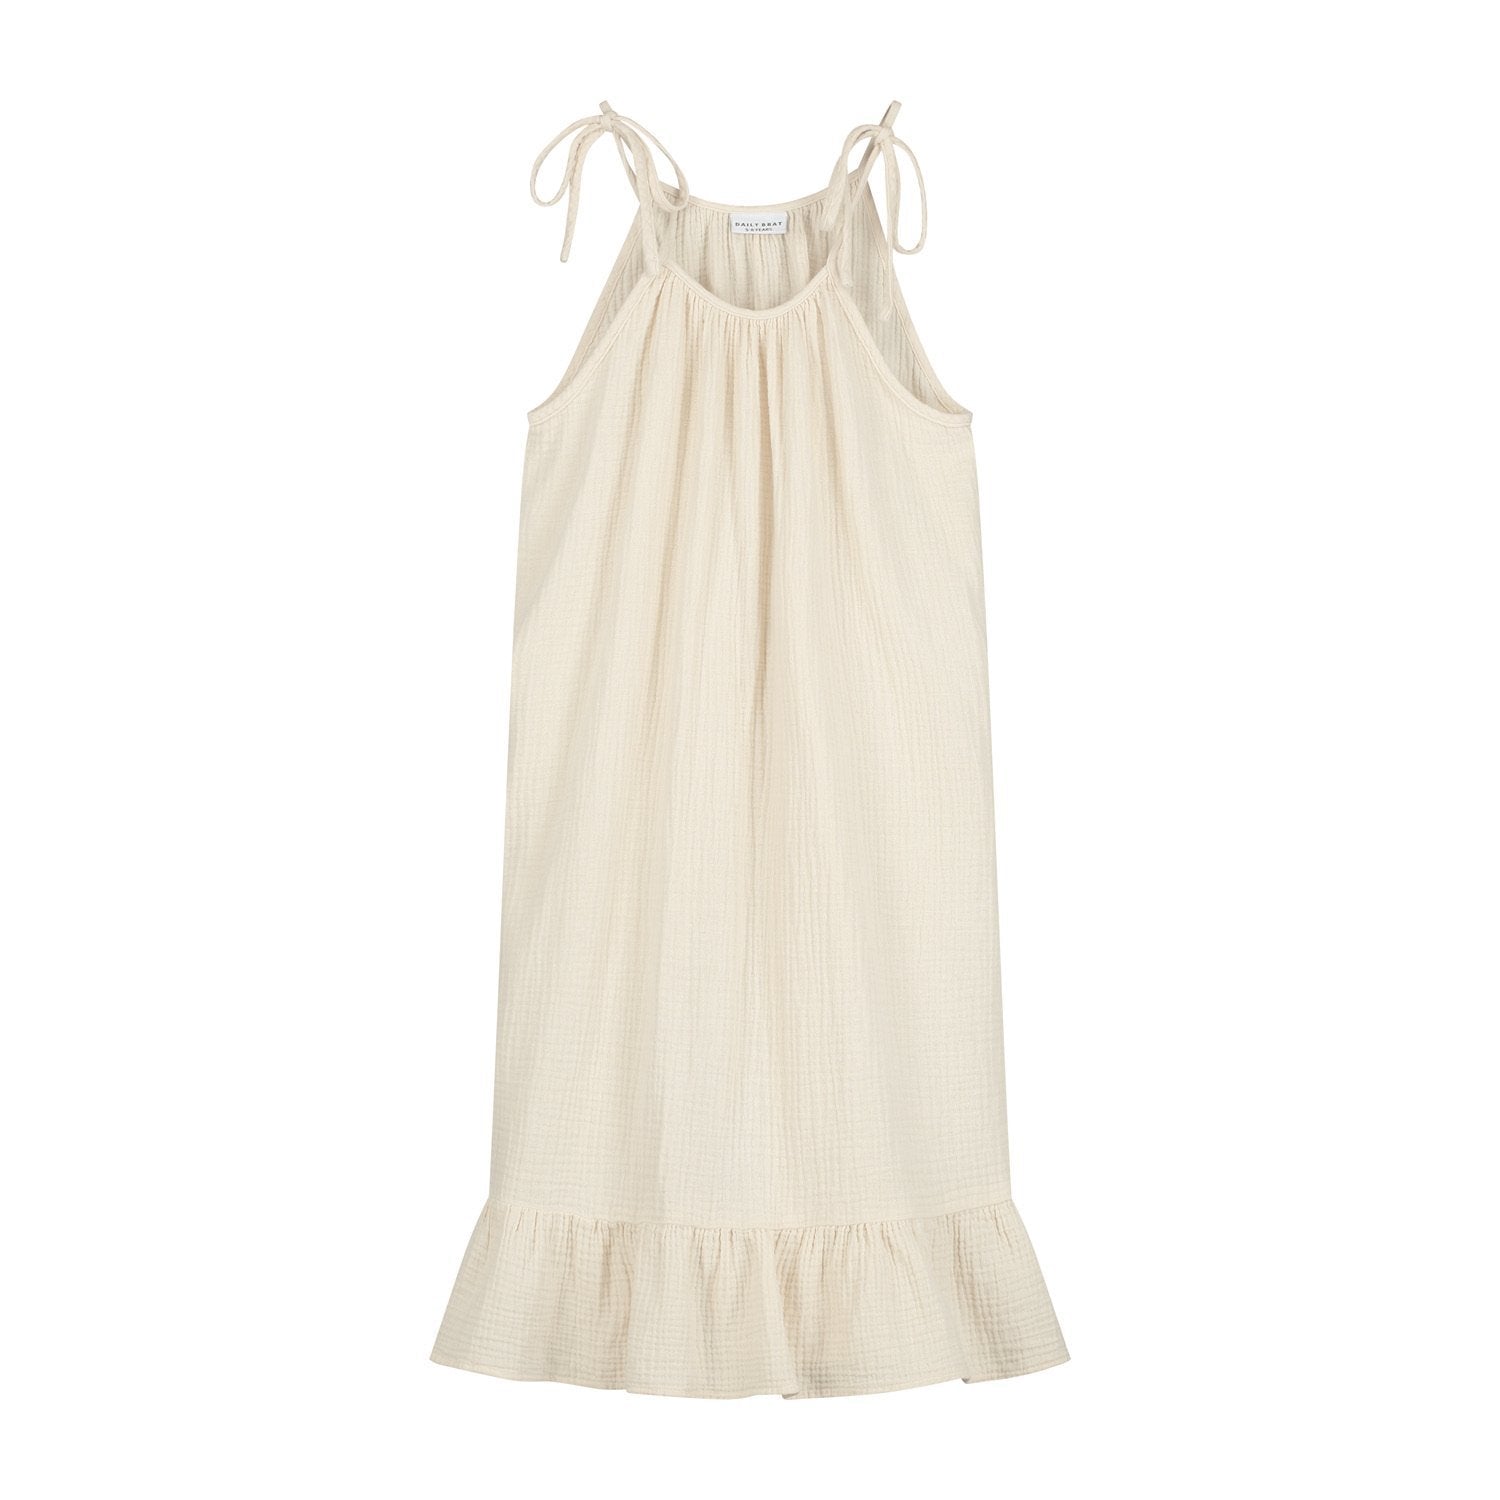 Belle Dress Ivory find Stylish Fashion for Little People- at Little Foxx Concept Store